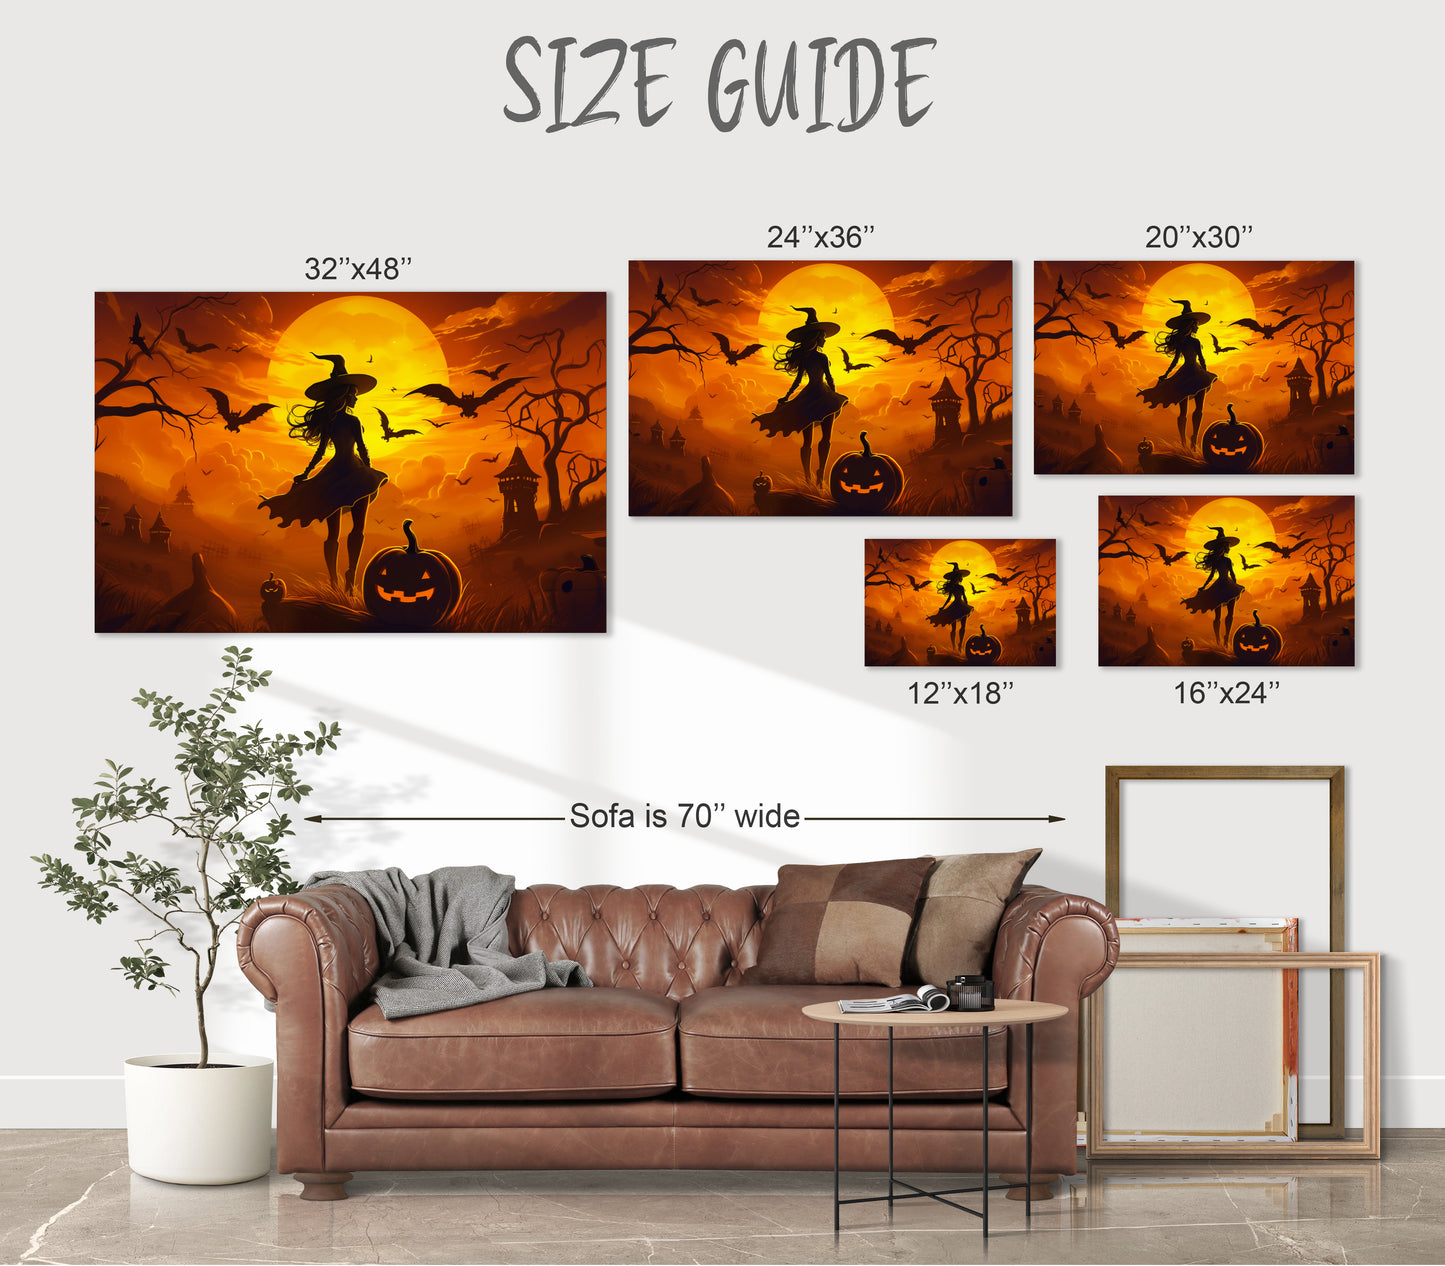 Silhouette of Witch Canvas Print Aesthetic Halloween Wall Decor Art Prints Gifts